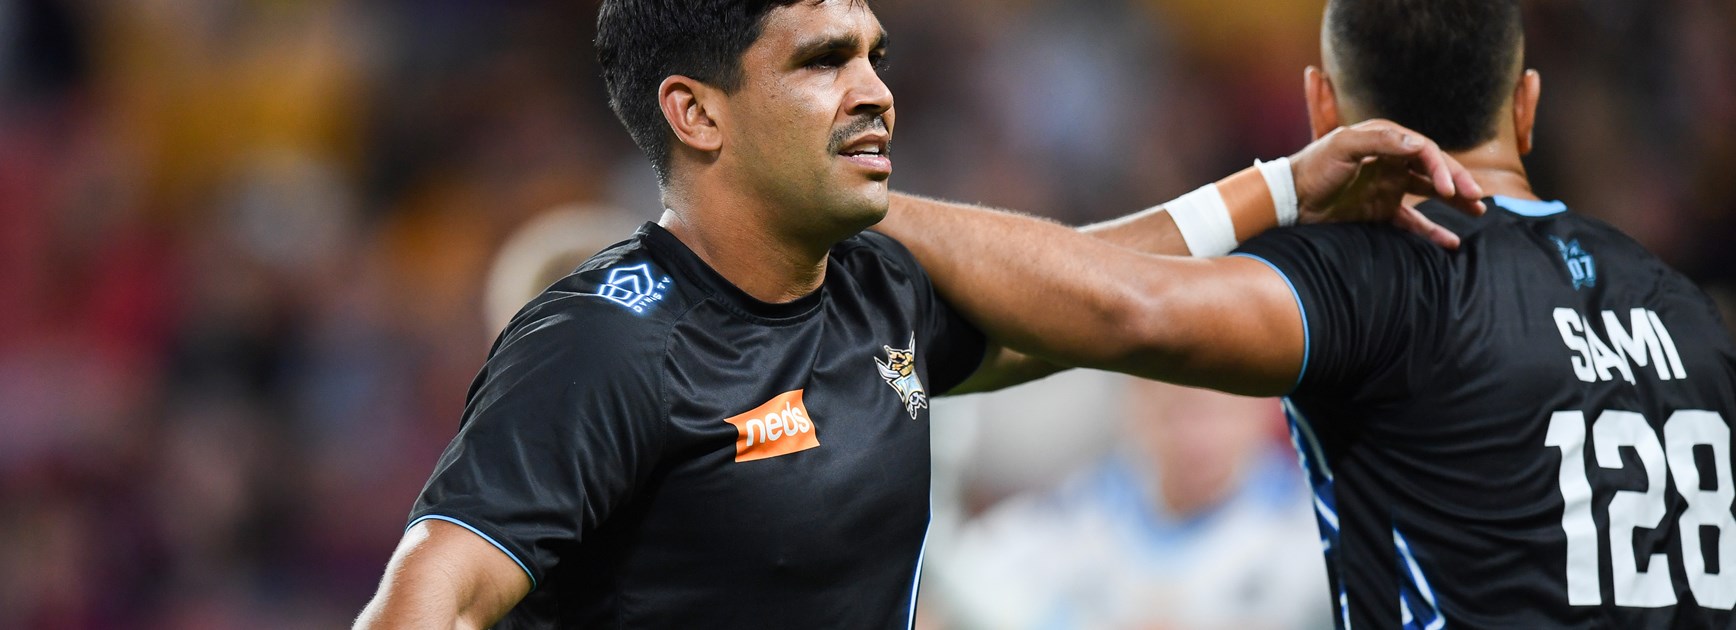 Tyrone Peachey in training with the Titans.